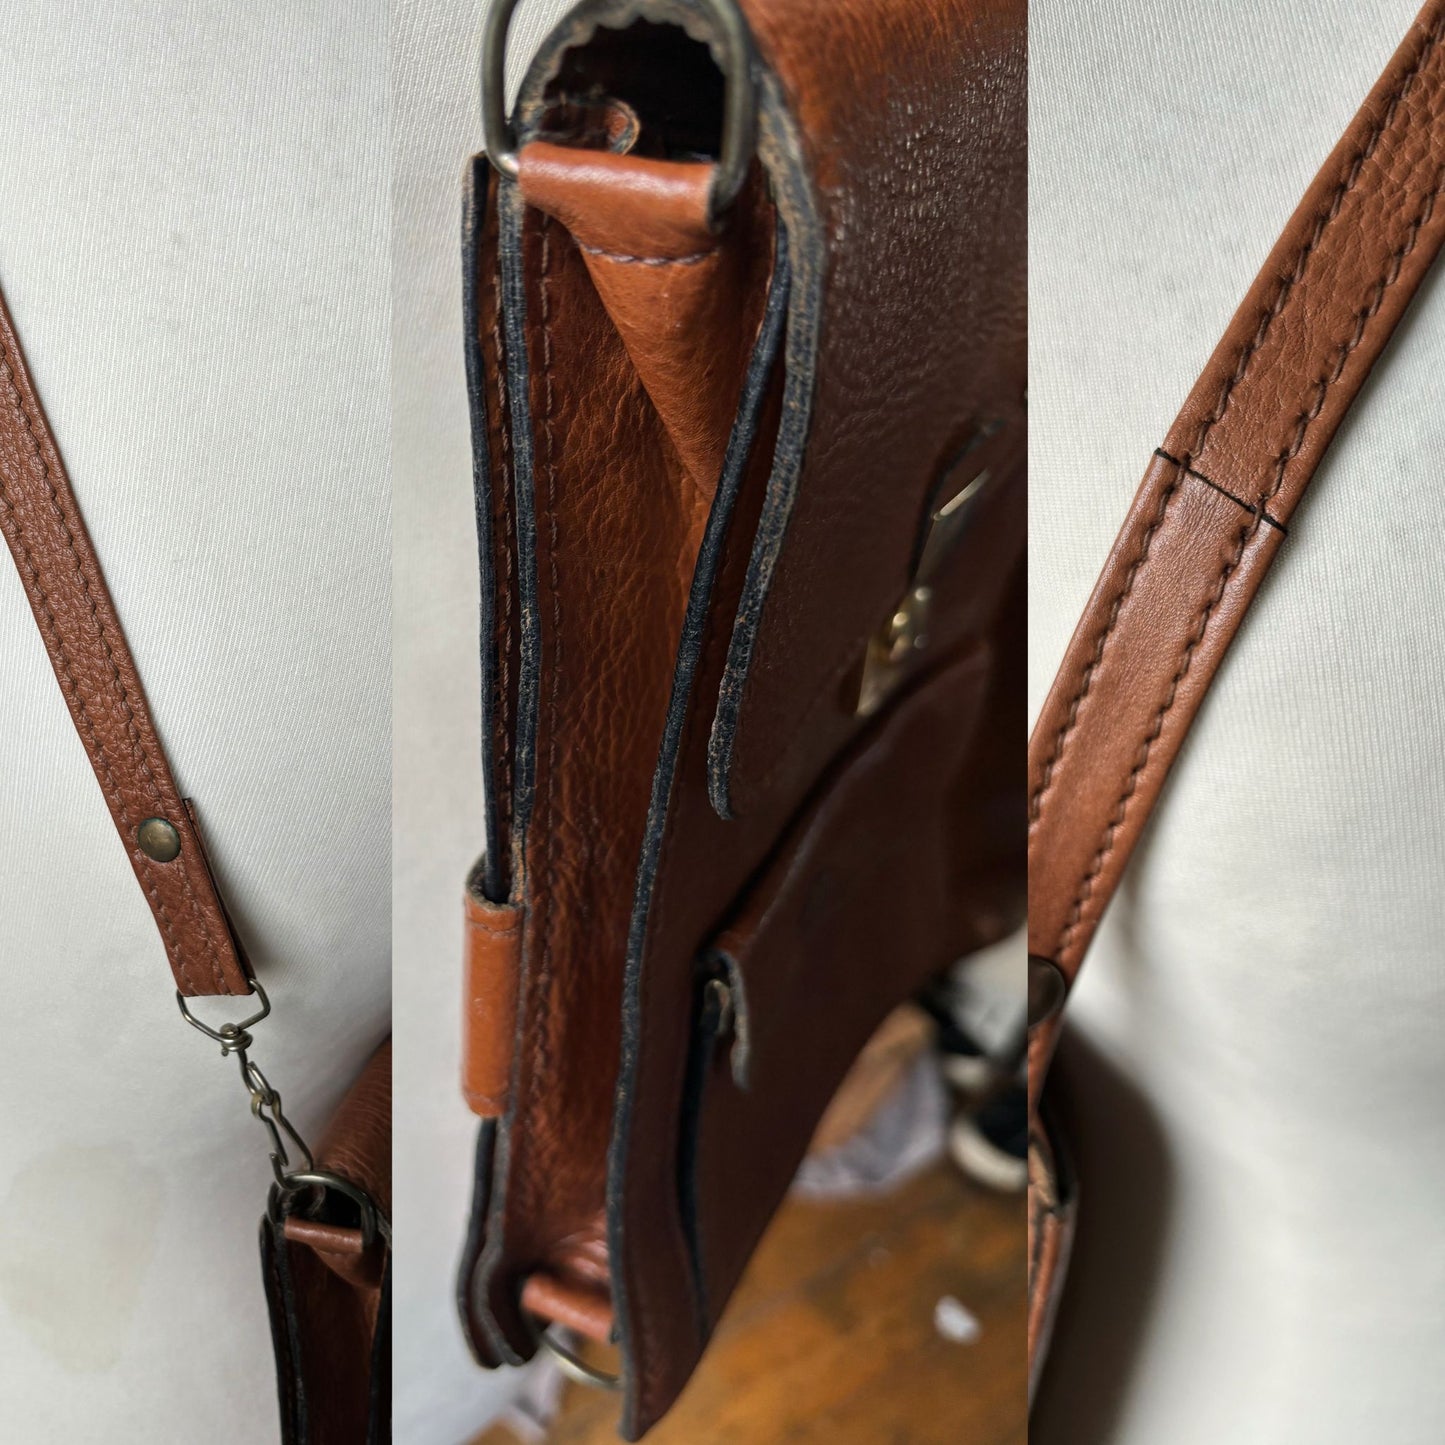 Vintage 70s Brown Leather Shoulder Bag with multiple compartments - Practical and Stylish Unisex Travel Companion